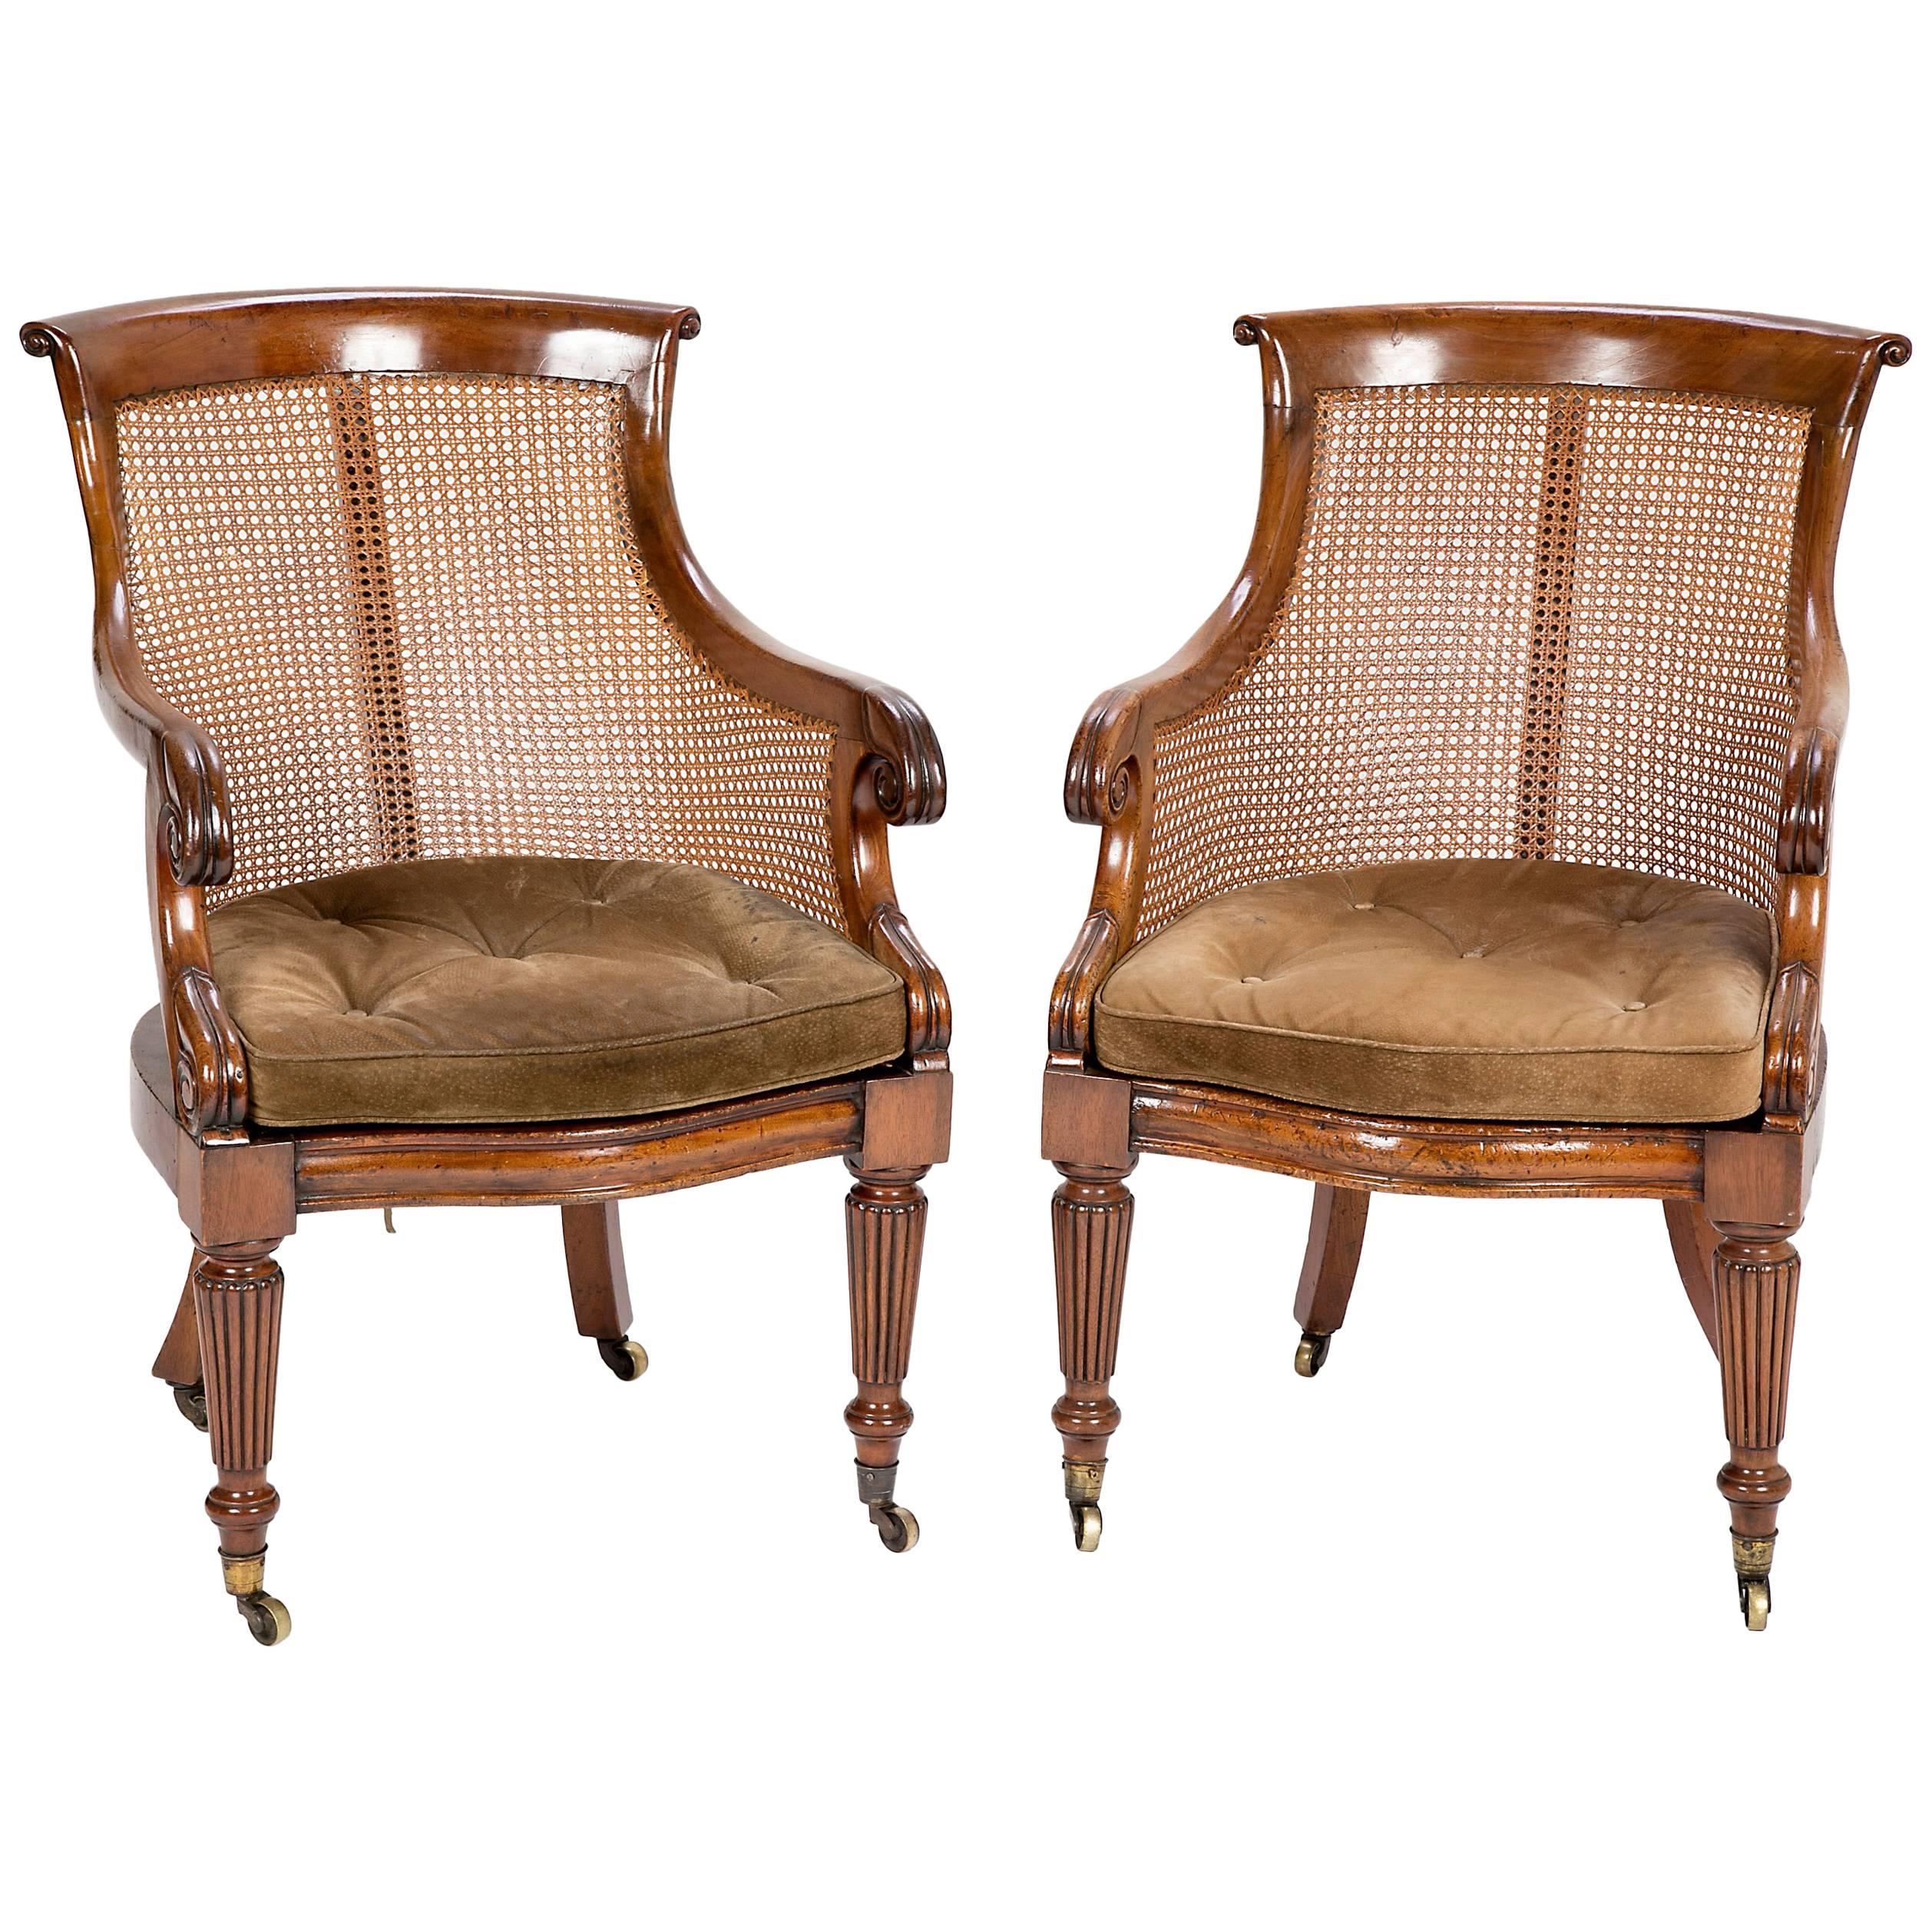 Pair of Late Regency Mahogany and Caned Bergere Chairs